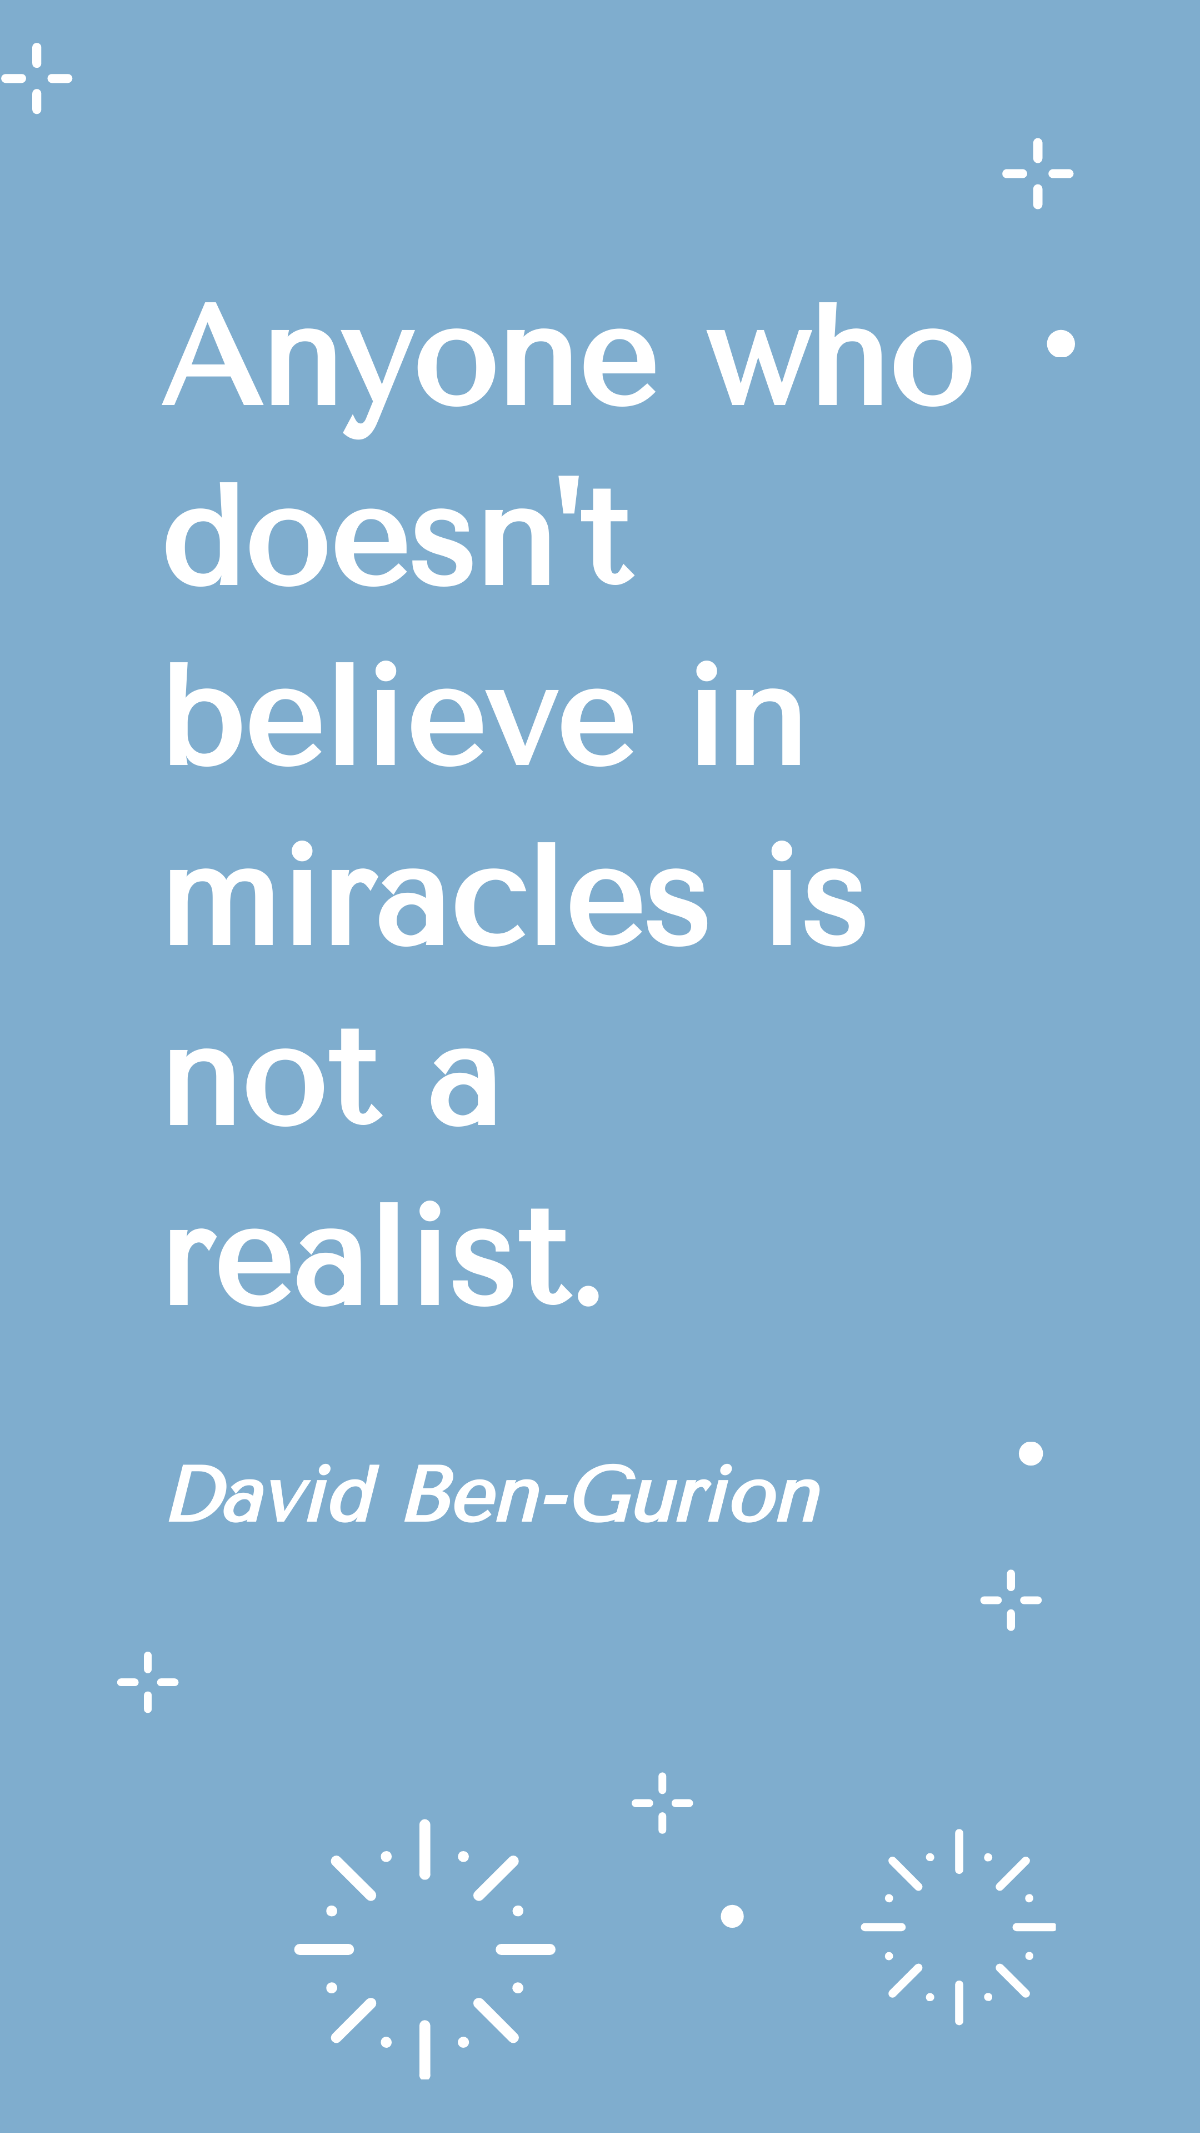 Free David Ben-Gurion - Anyone who doesn't believe in miracles is not a realist. Template